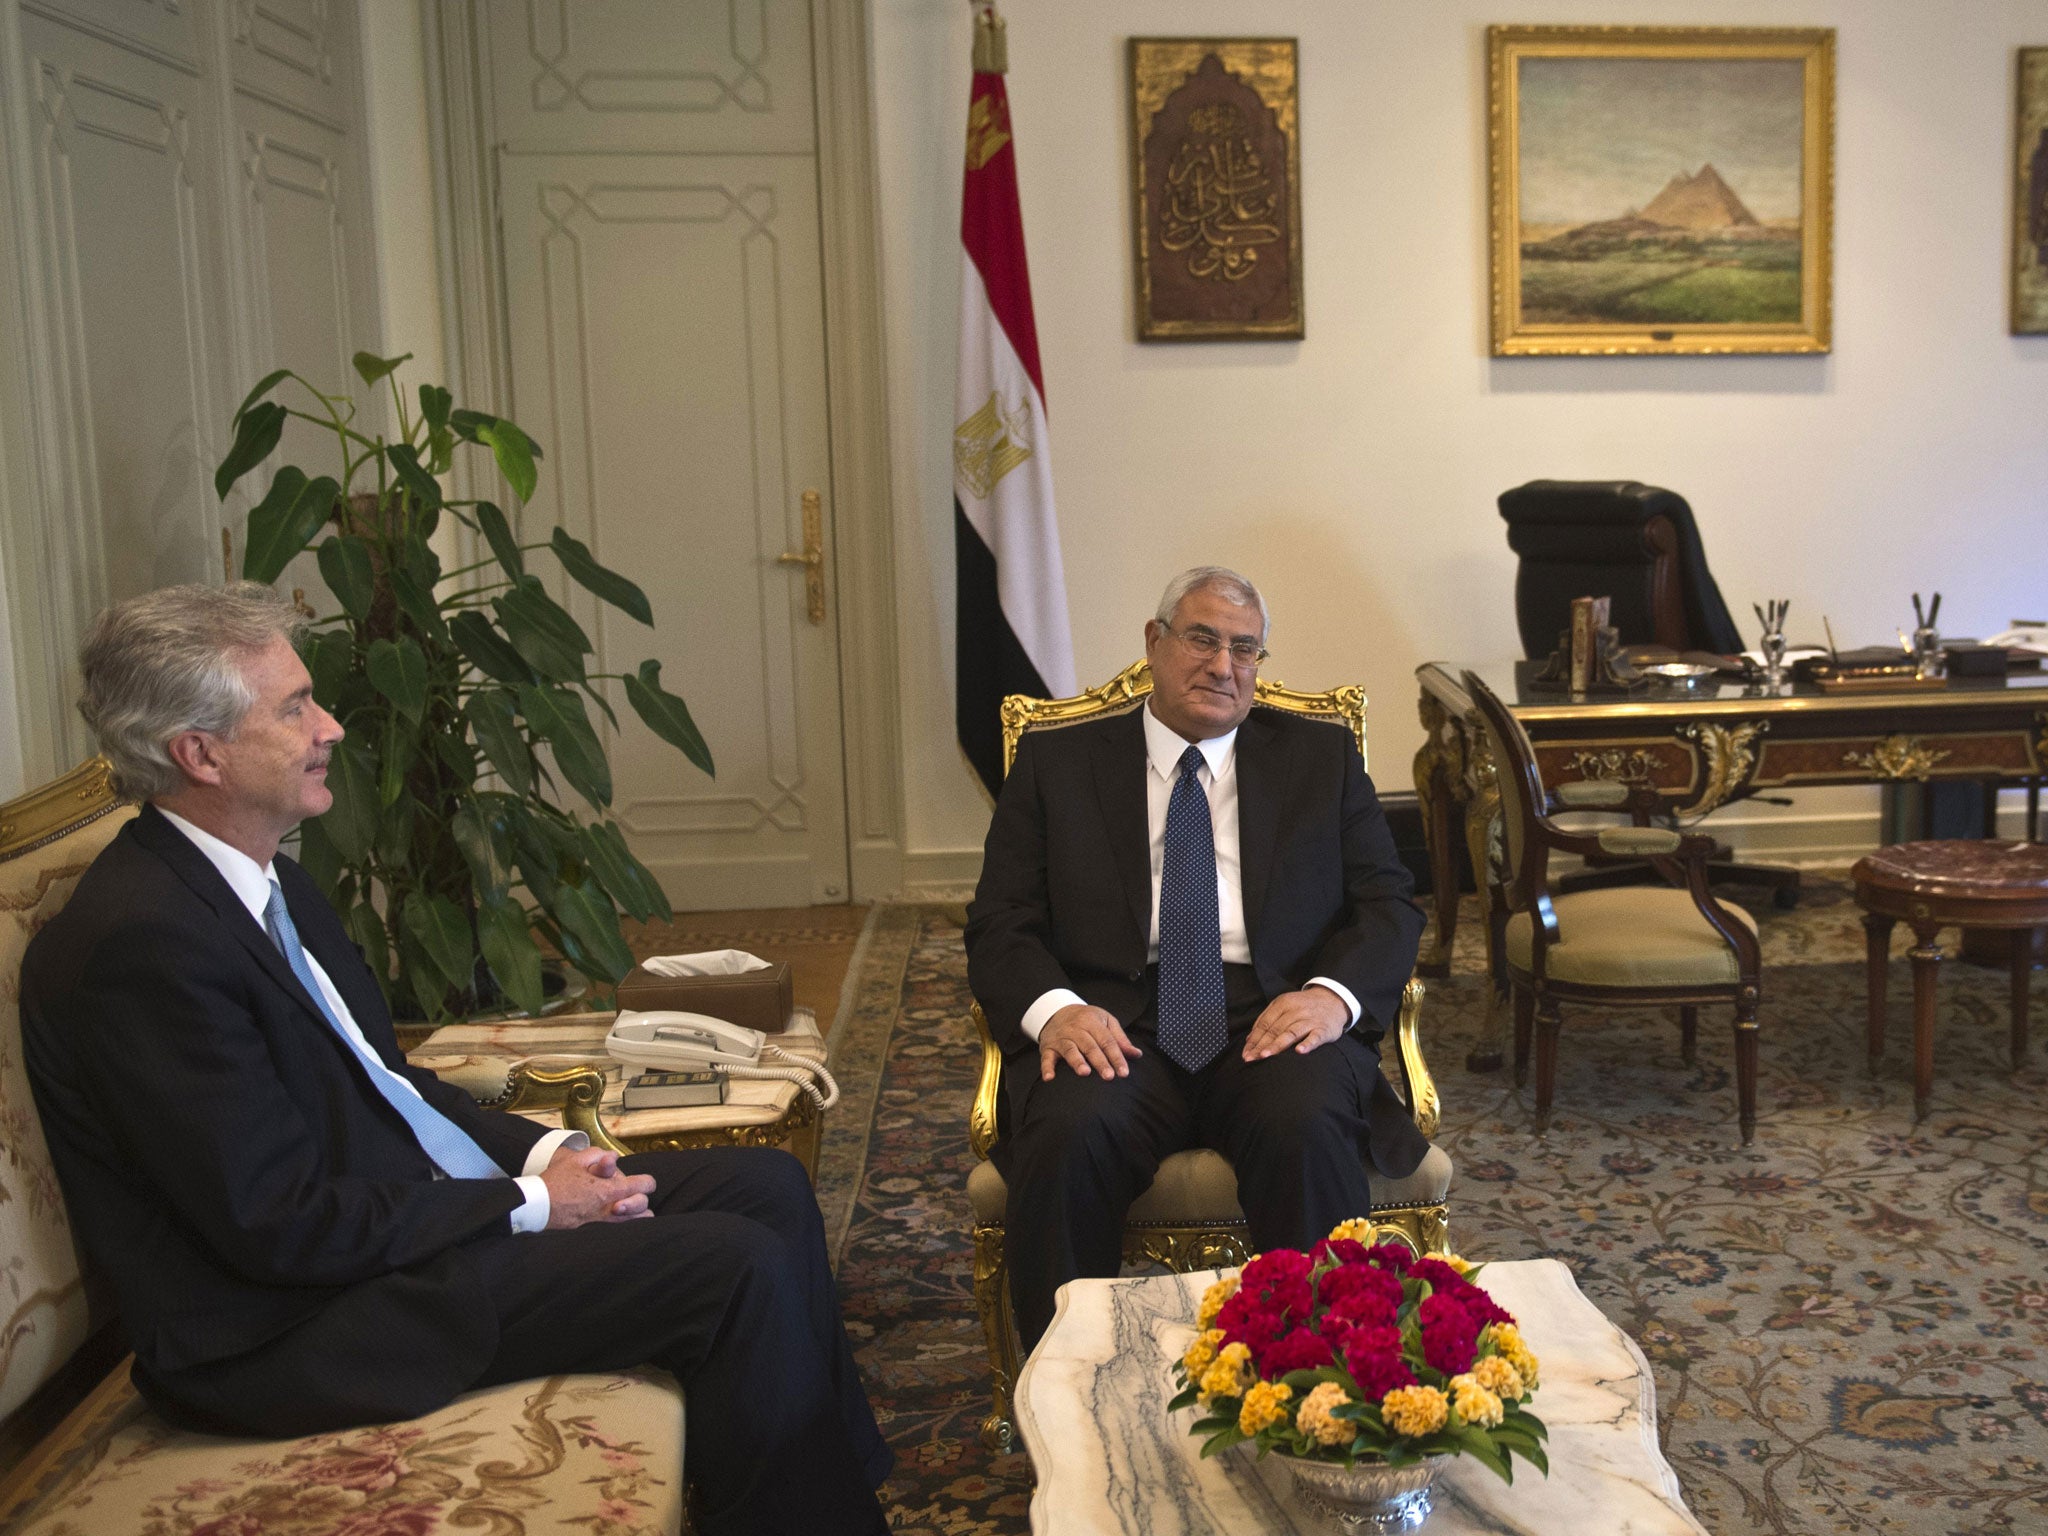 Egypt's interim president Adly Mansour meets with US Deputy Secretary of State William Burns (L) at the presidential palace in Cairo on July 15, 2013. The senior US official was in Cairo to press for a return to elected government following Mohamed Morsi's overthrow, as the Islamist leader's supporters and opponents readied rival rallies.